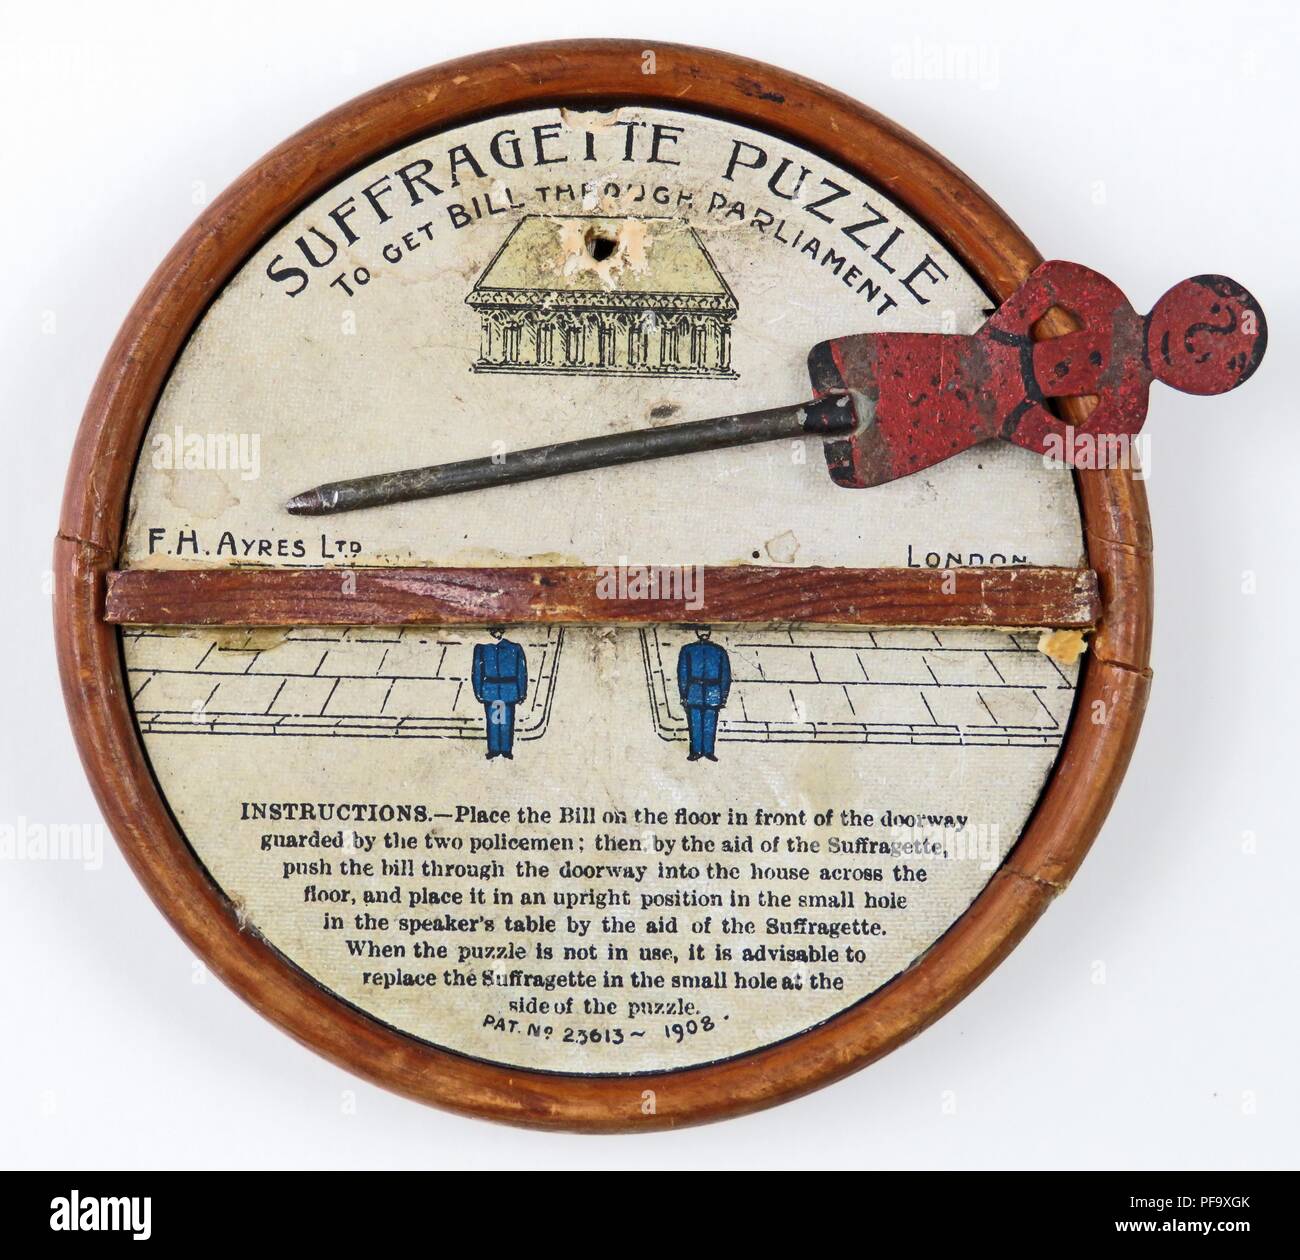 Suffragette Puzzle To Get Bill Through Parliament game, with a metal pin, pushed by a red suffragette figure, which would stall at the wooden barrier because of magnets placed underneath, intended to illustrate the difficulty of passing a suffrage bill through the English parliament,  made by FH Ayers Ltd of Aldersgate Street in London, and produced for the British Market, 1907. Photography by Emilia van Beugen. () Stock Photo